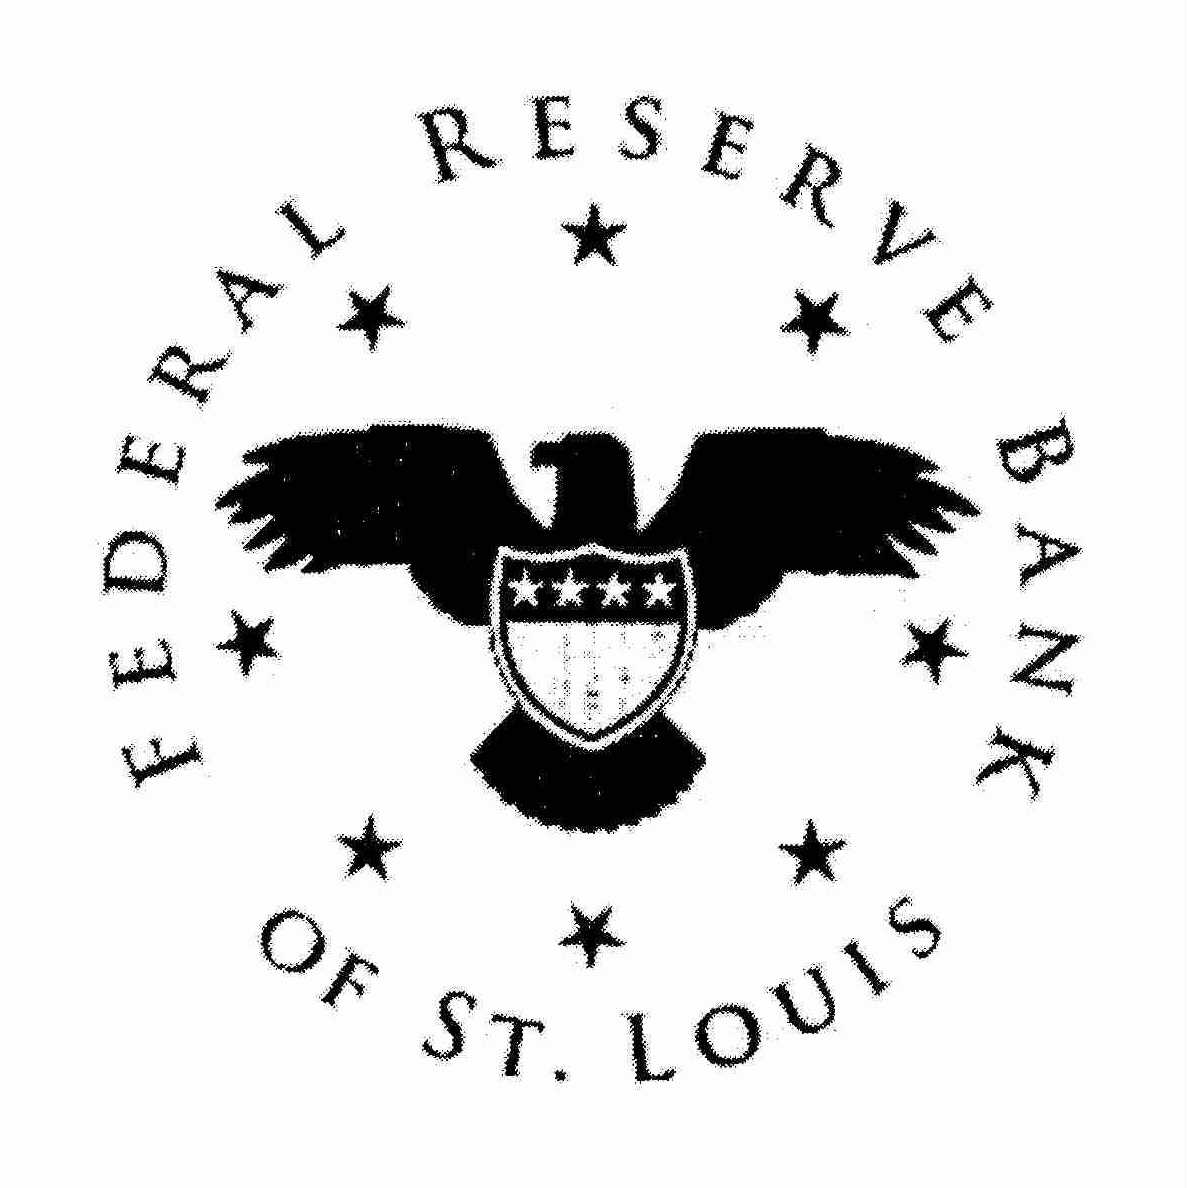  FEDERAL RESERVE BANK OF ST. LOUIS